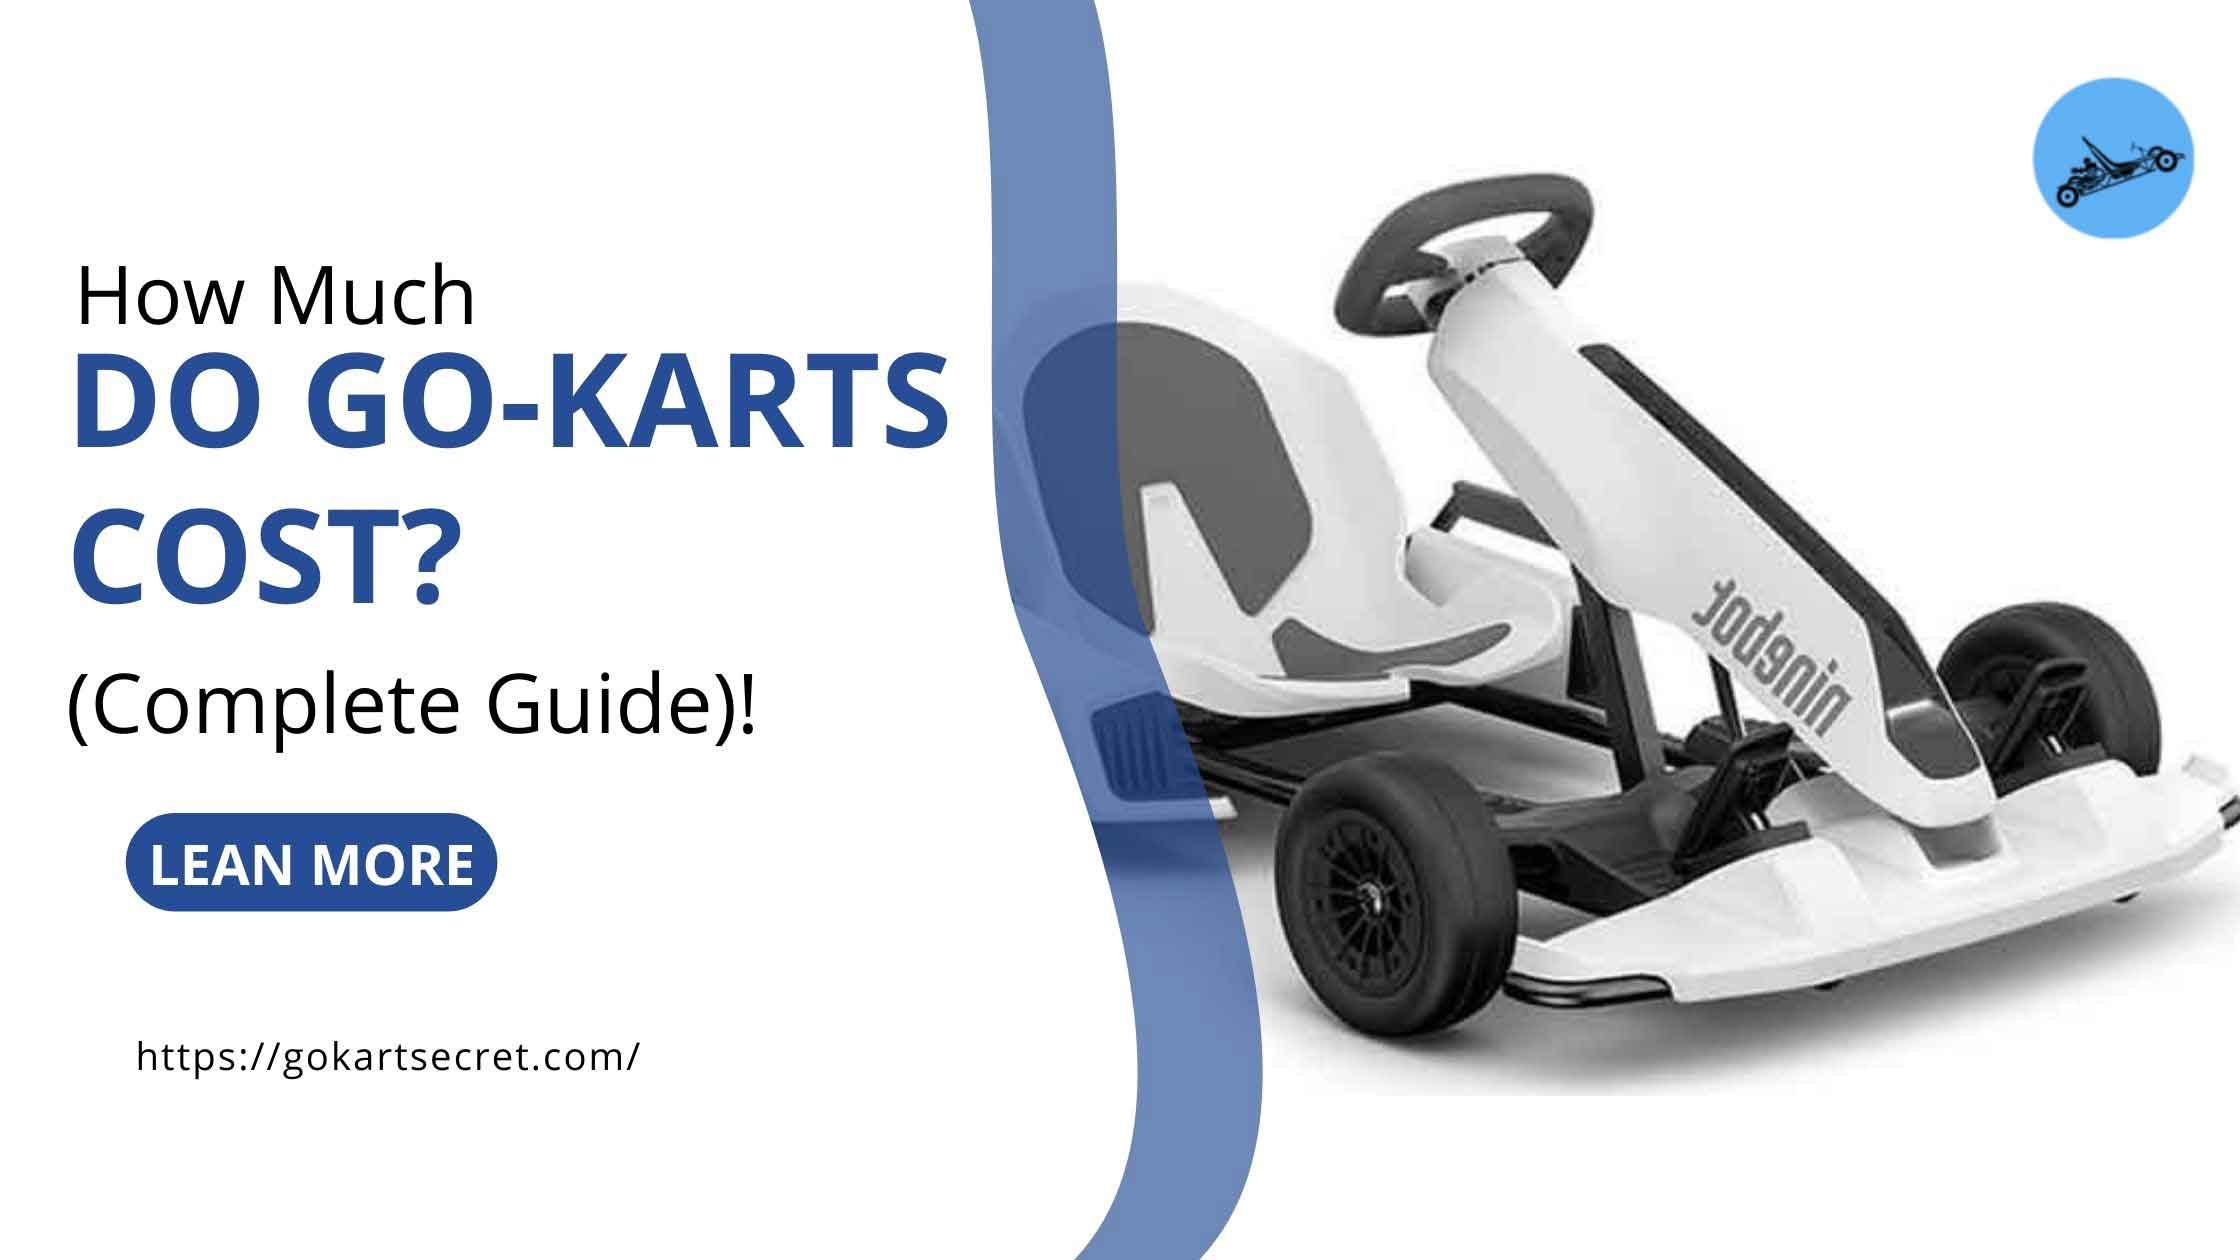 How Much Do Go-Karts Cost? (Complete Guide)